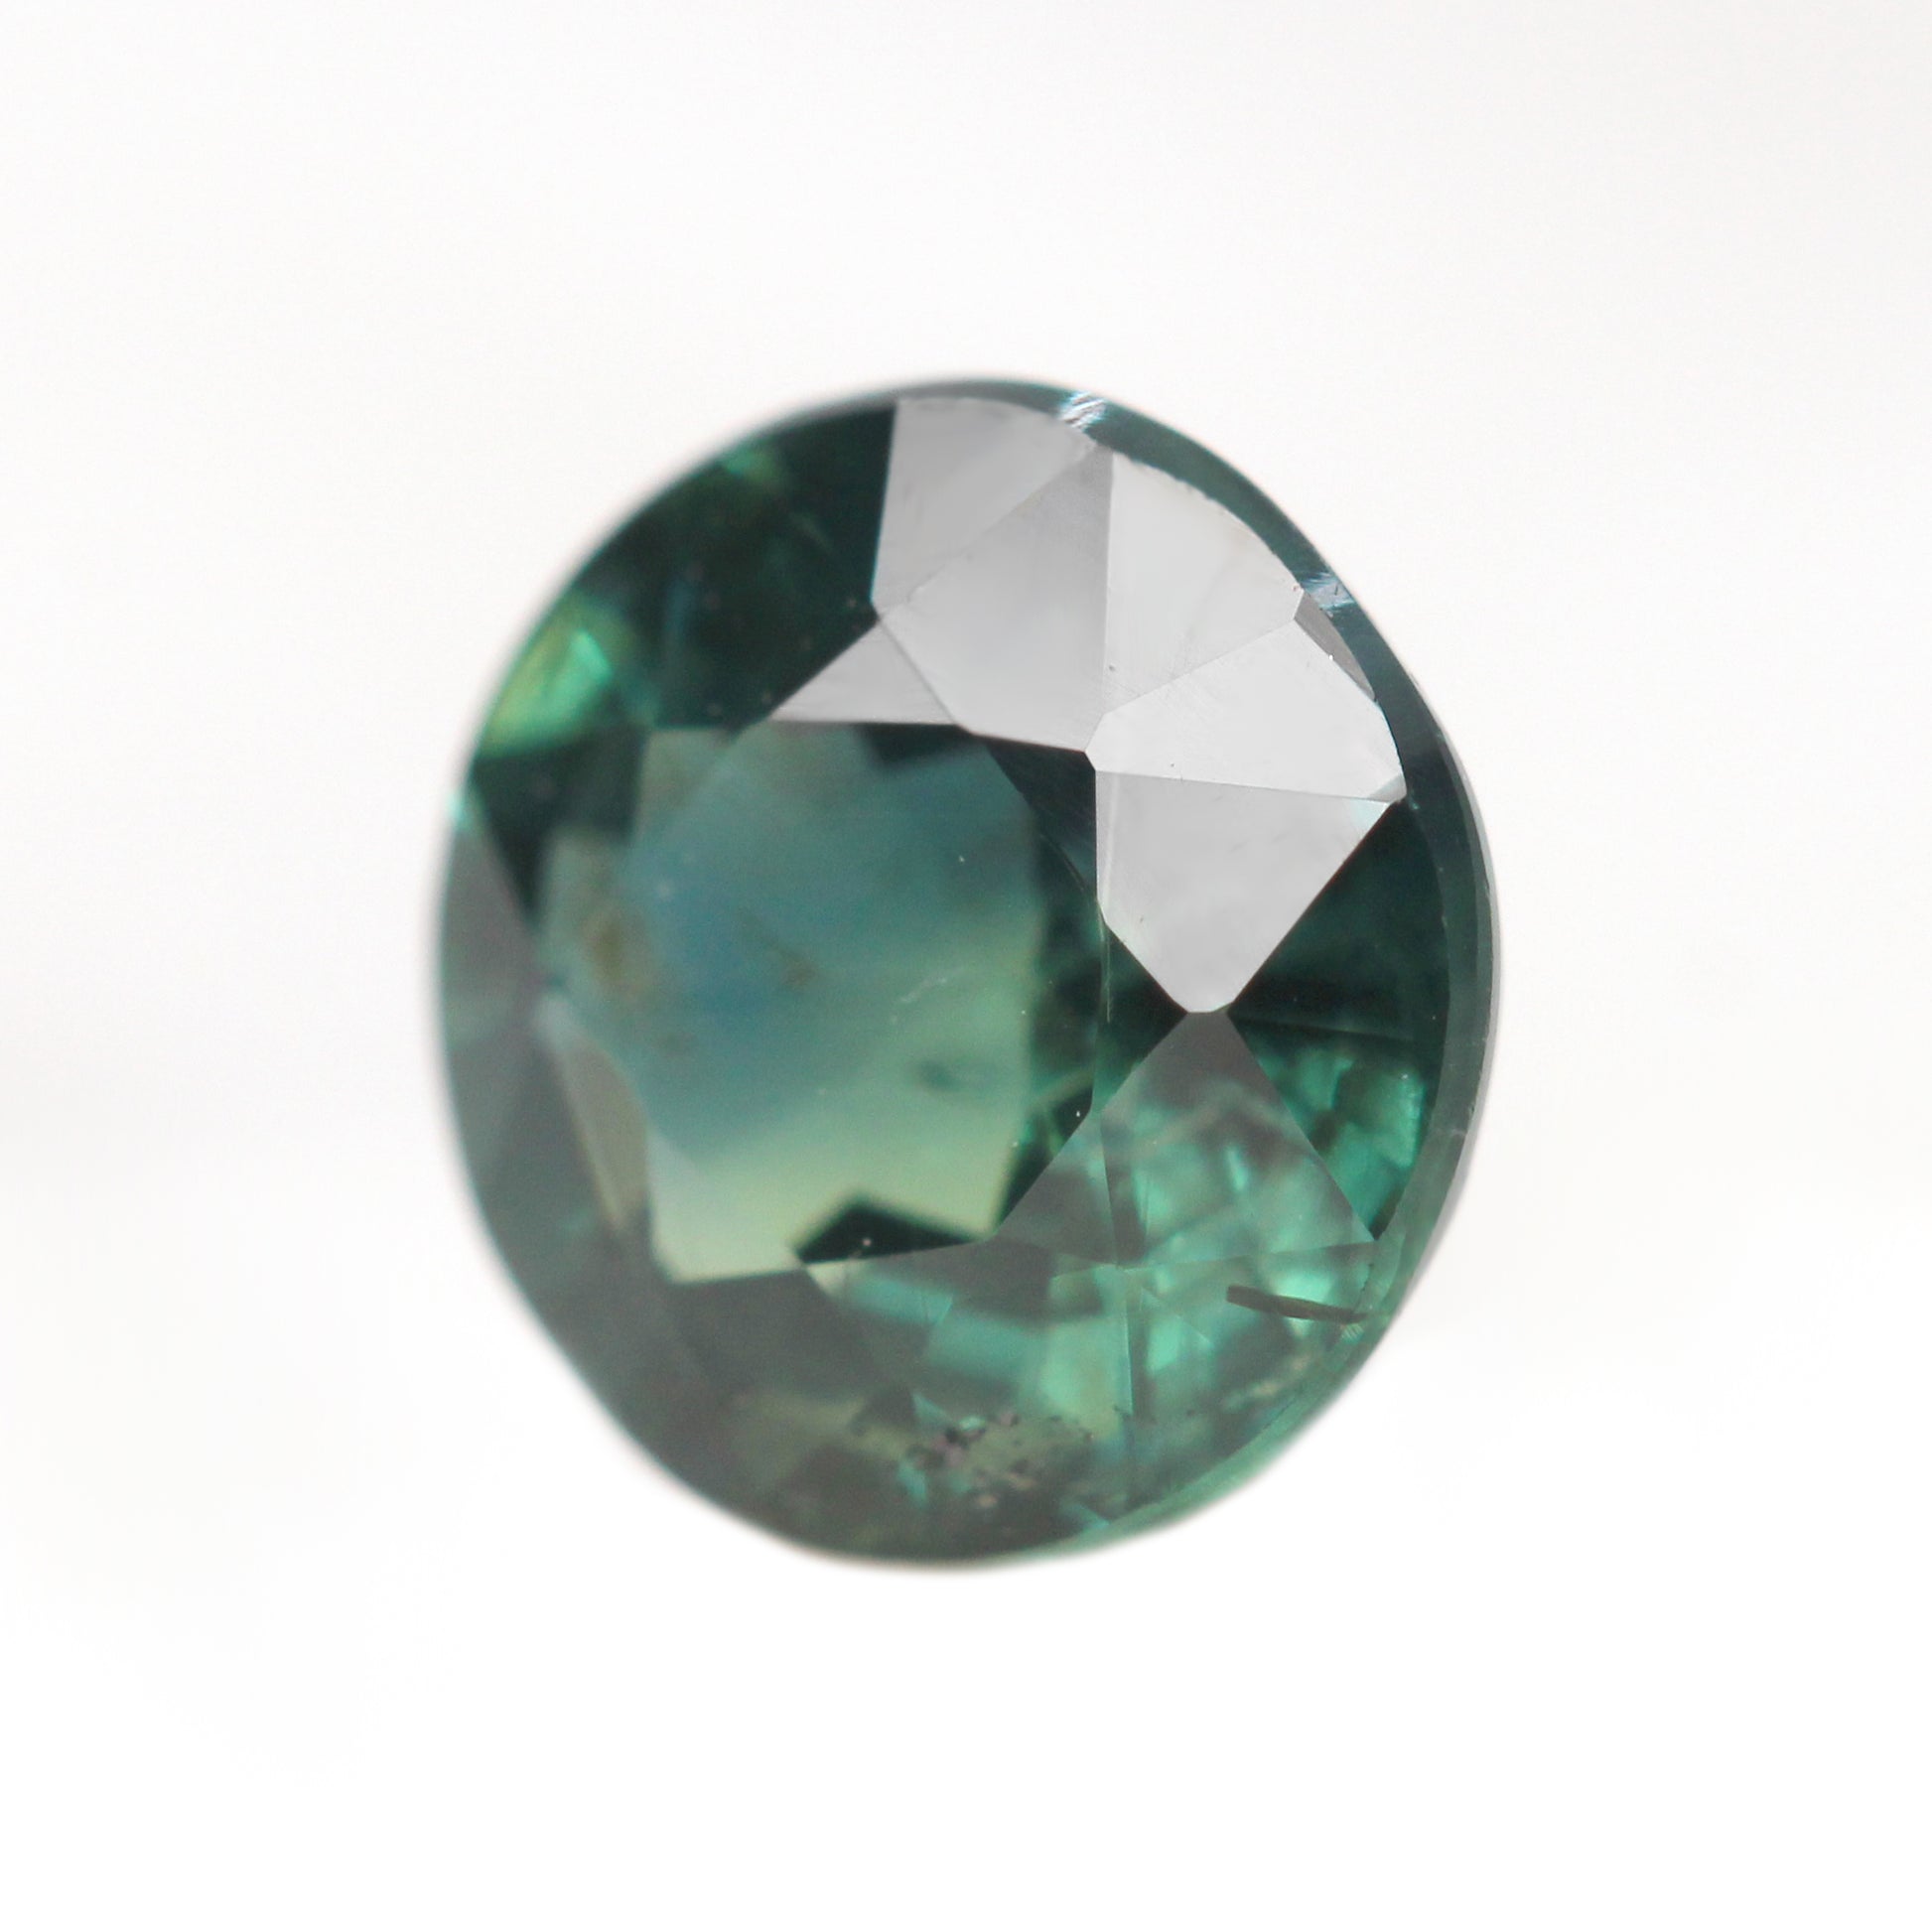 1.25 Carat Round Teal Green Sapphire for Custom Work - Inventory Code TGRS125 - Midwinter Co. Alternative Bridal Rings and Modern Fine Jewelry